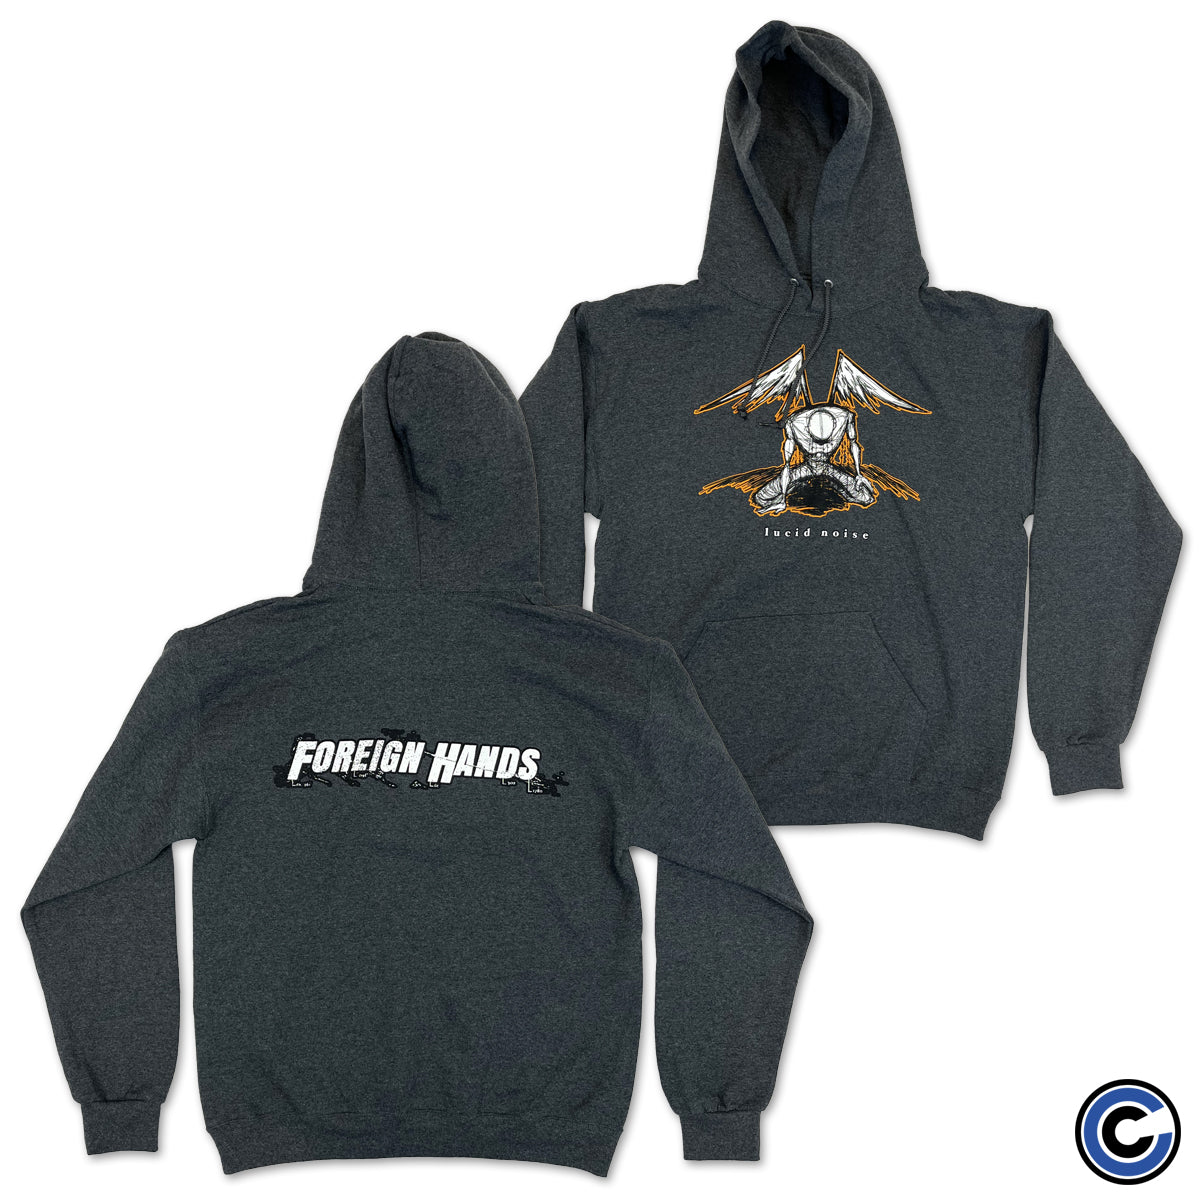 Foreign Hands "Lucid Noise" Hoodie